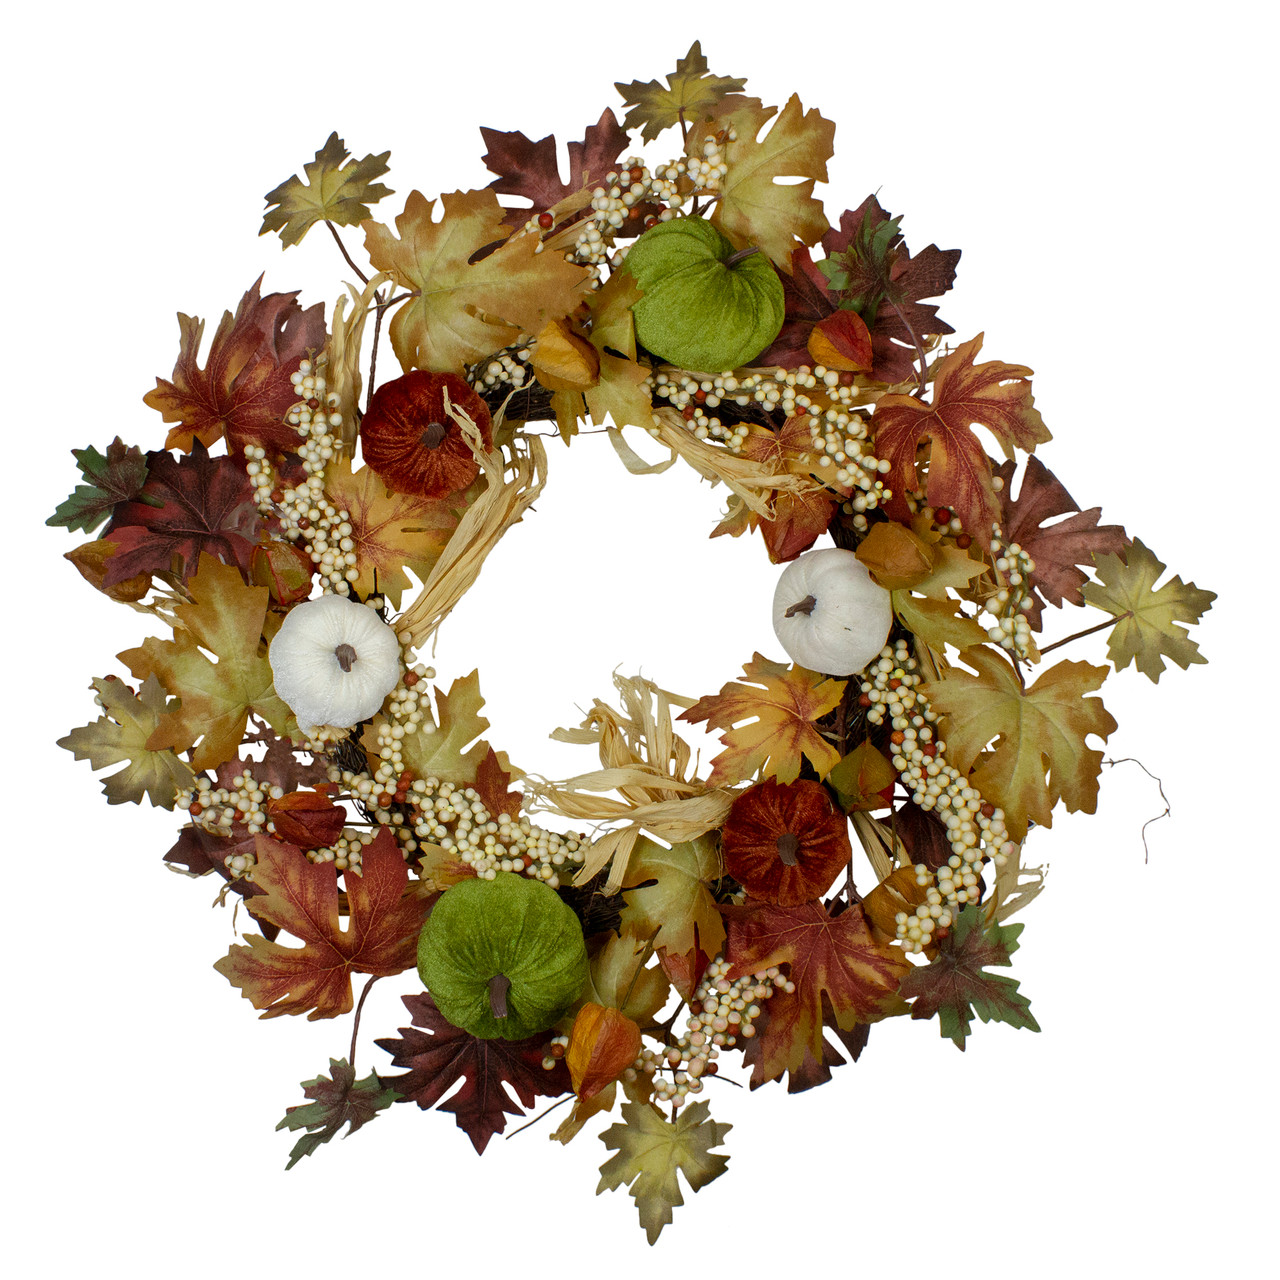 Straw Snowflake and Star Ornament Set - 48 Pc. 